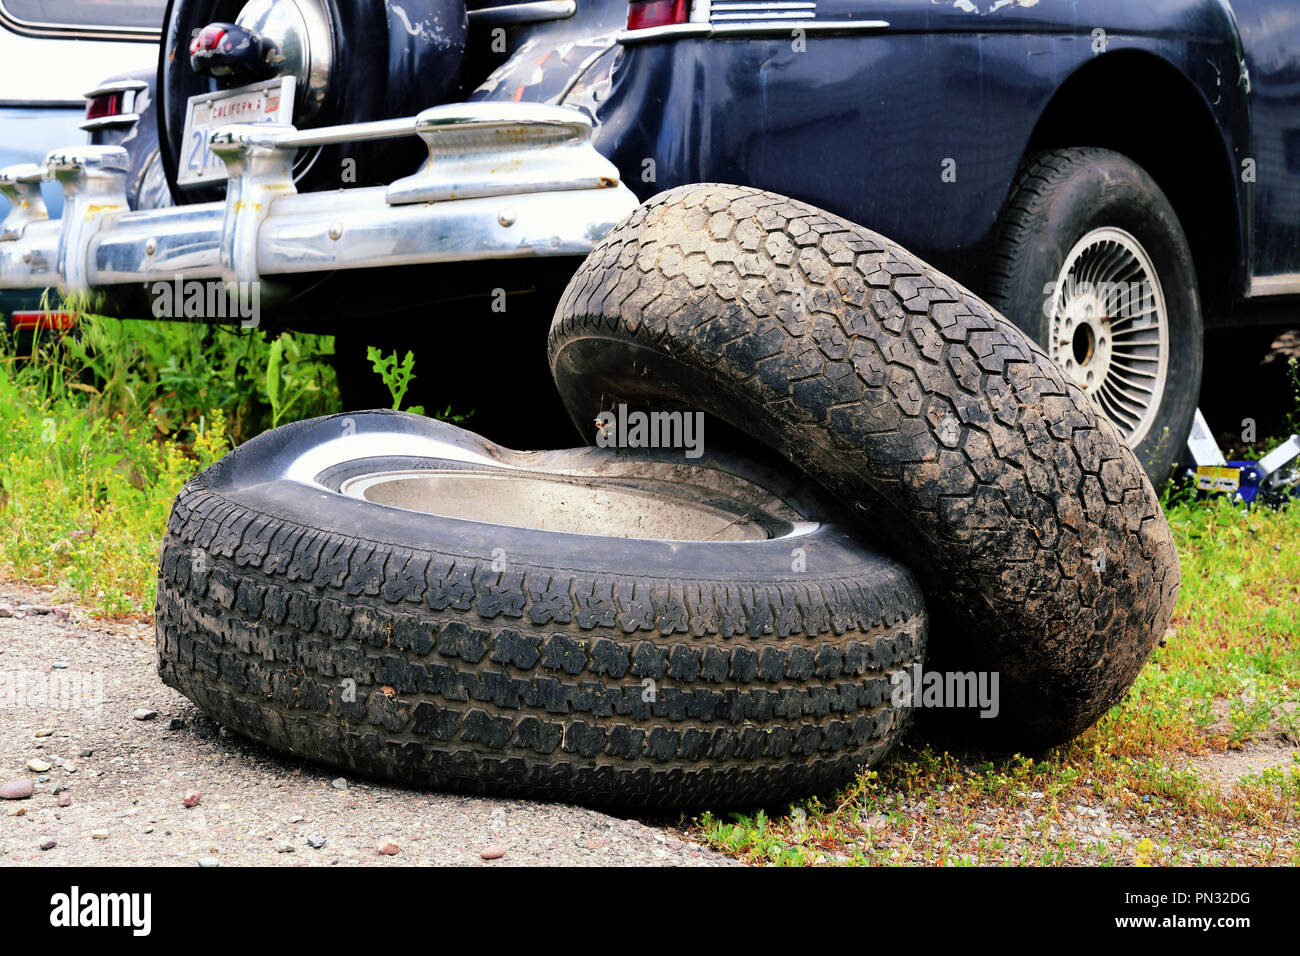 Old flat tires next to a vintage car in a state of repair Stock Photo